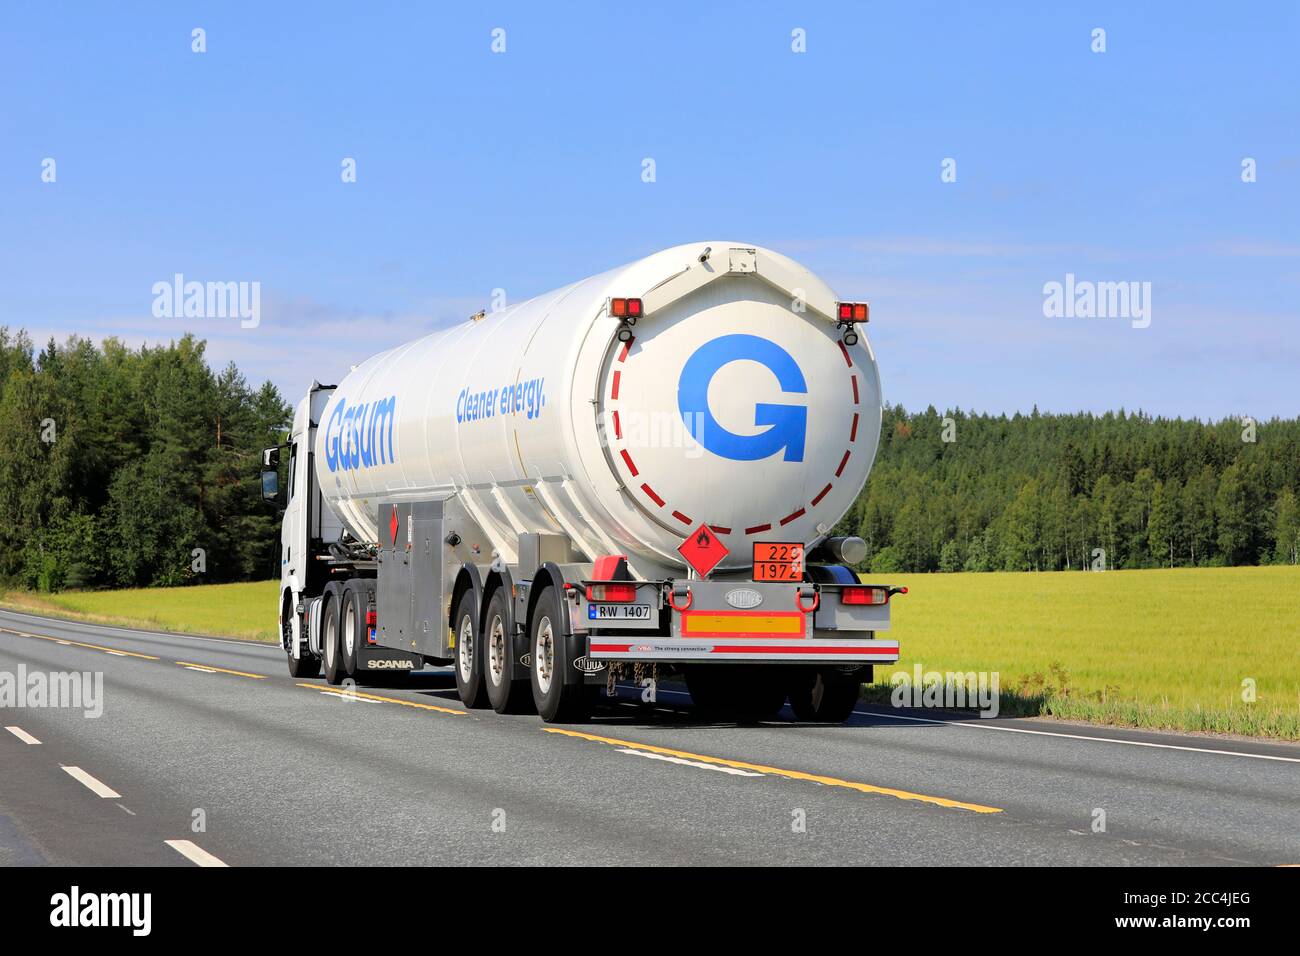 White Scania semi tank truck Gasum hauls LNG, Liquified natural gas, ADR 223-1972, on  Highway 2 in the summer. Jokioinen, Finland. August 14, 2020. Stock Photo